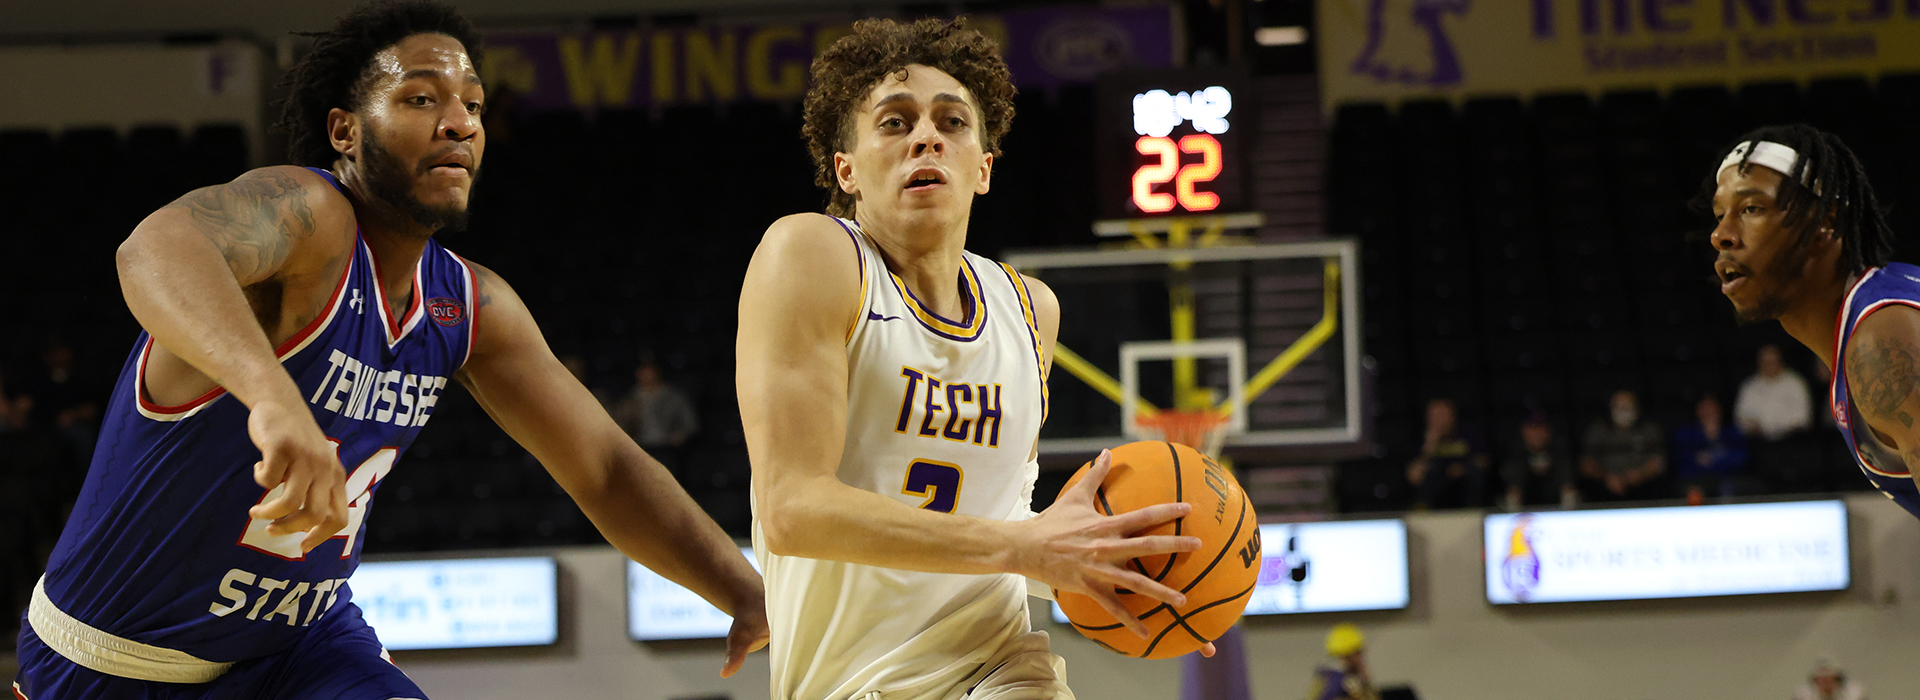 Tech men's basketball team drops in-state battle to Tennessee State